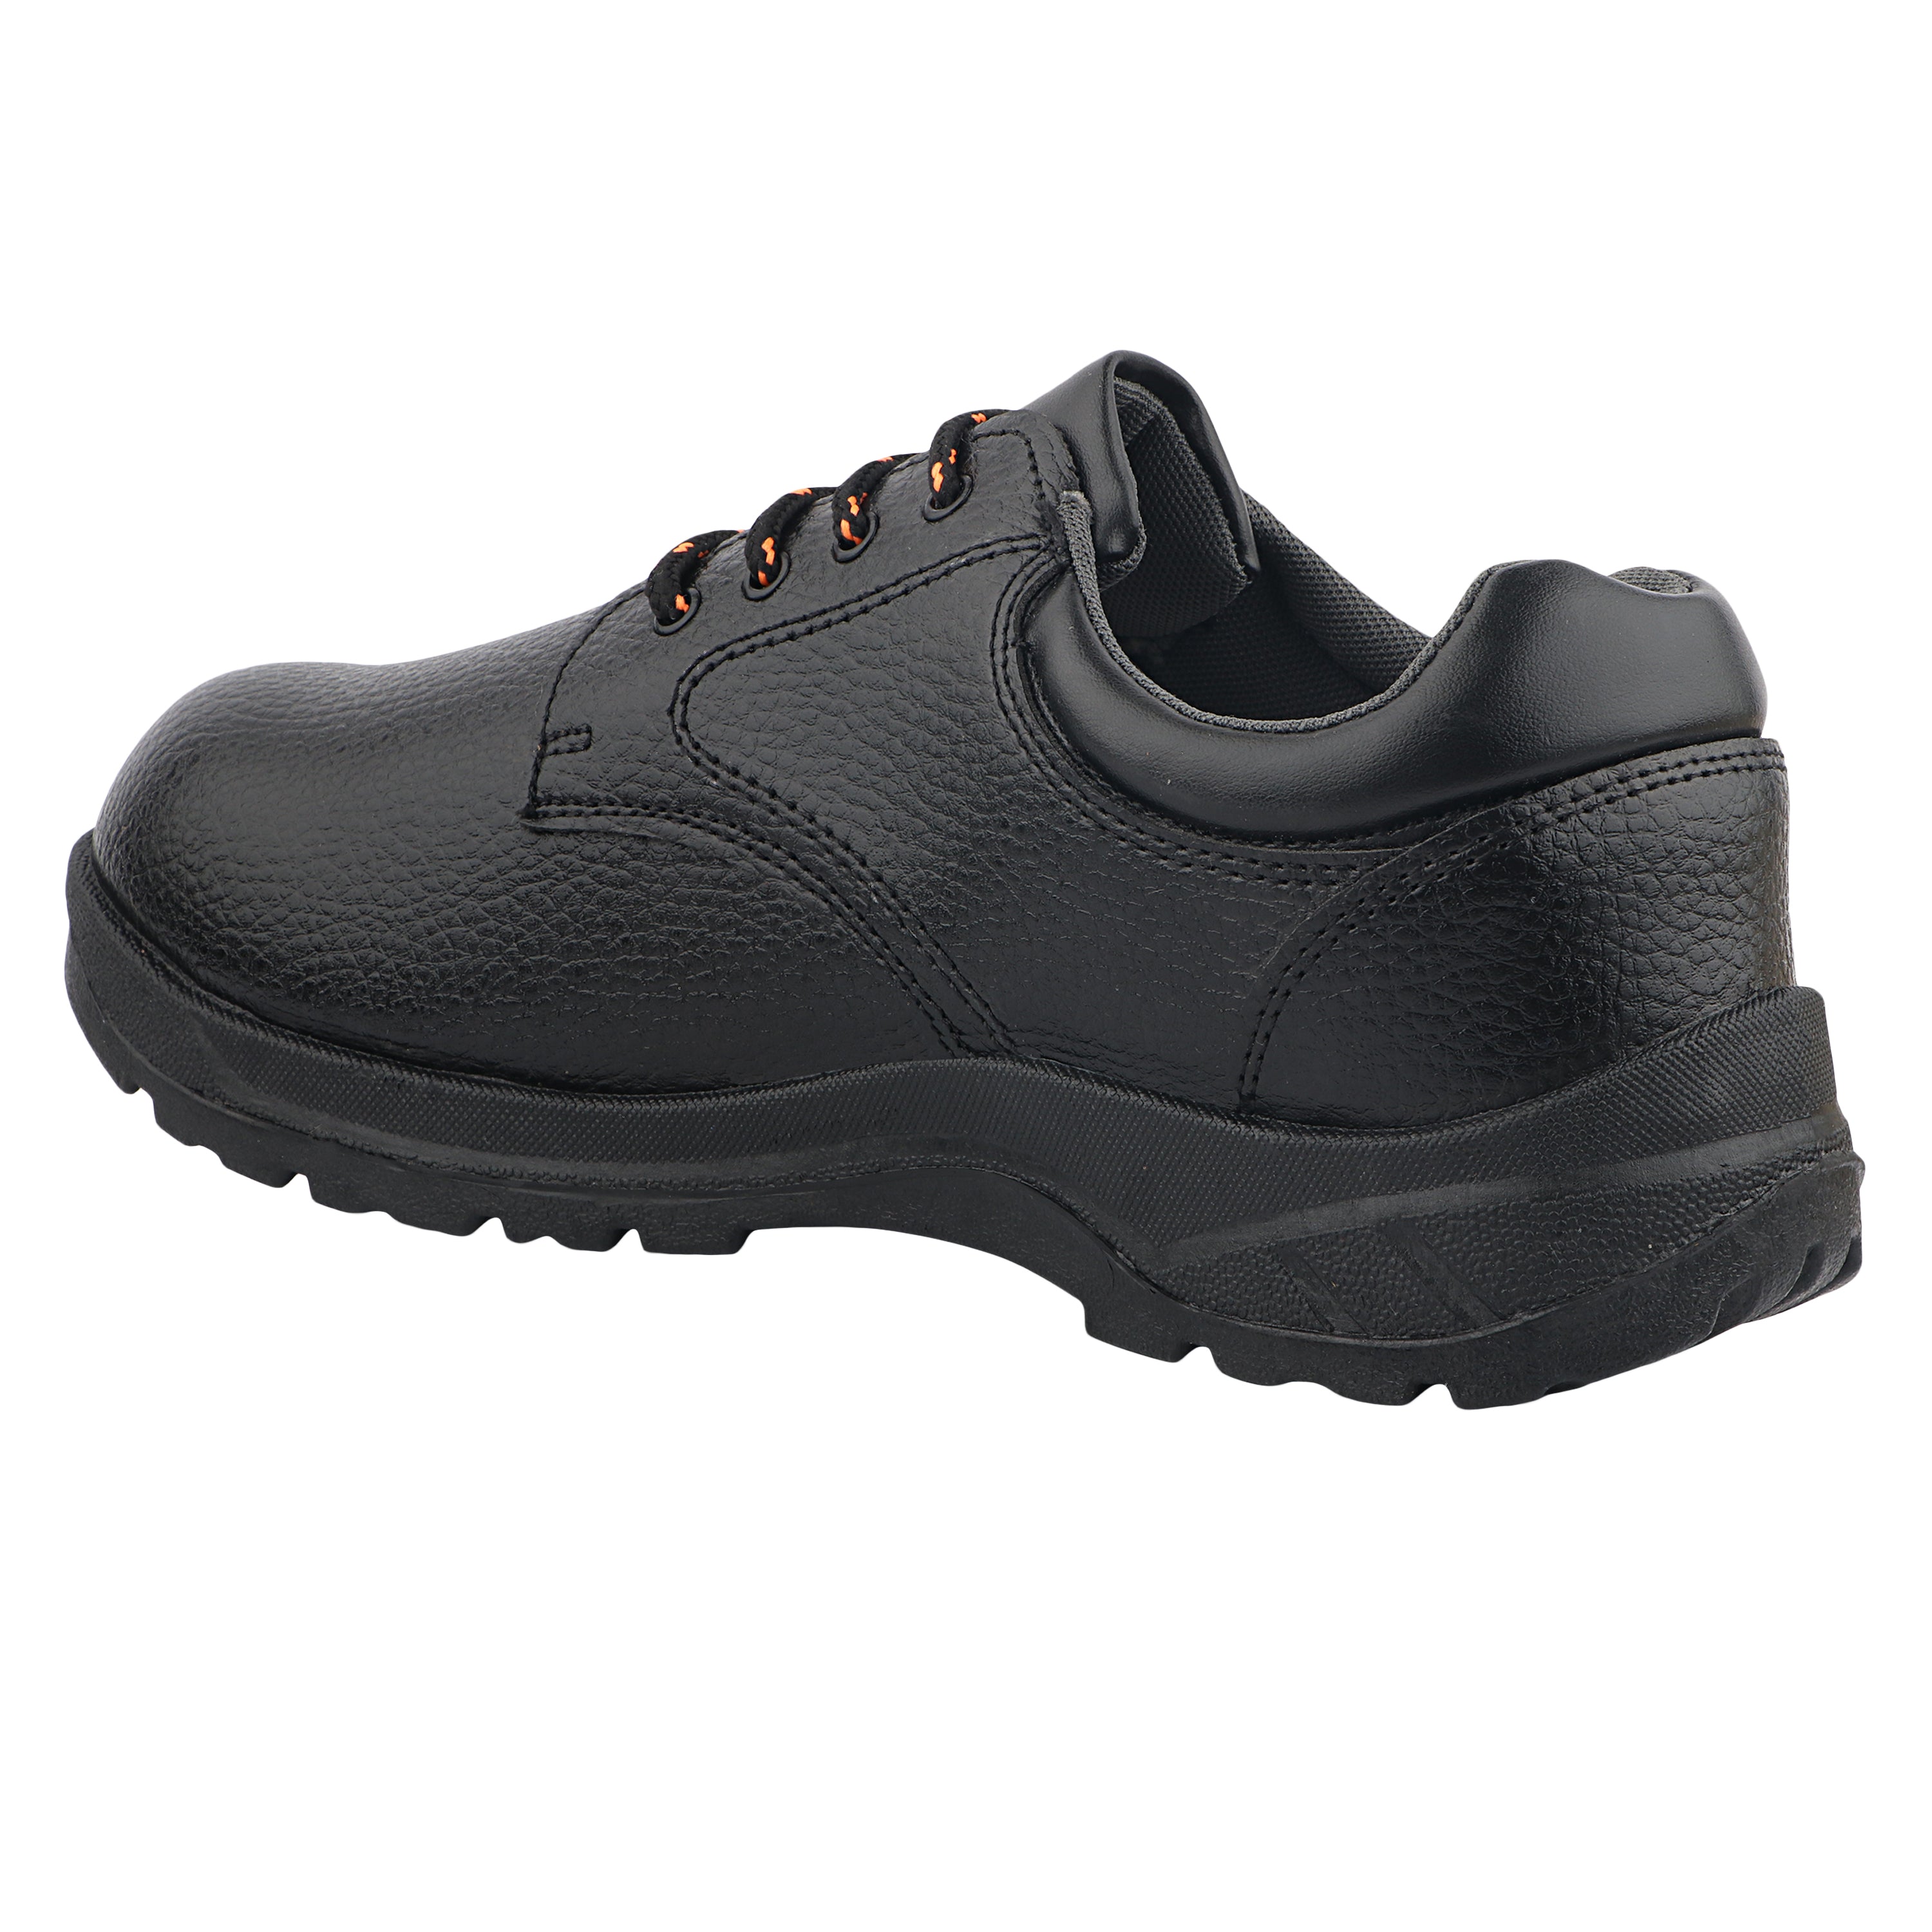 Fuel Arsenal LC Genuine Leather Safety Shoes for Men's Steel Toe Cap With Single Density PVC Sole (Black)